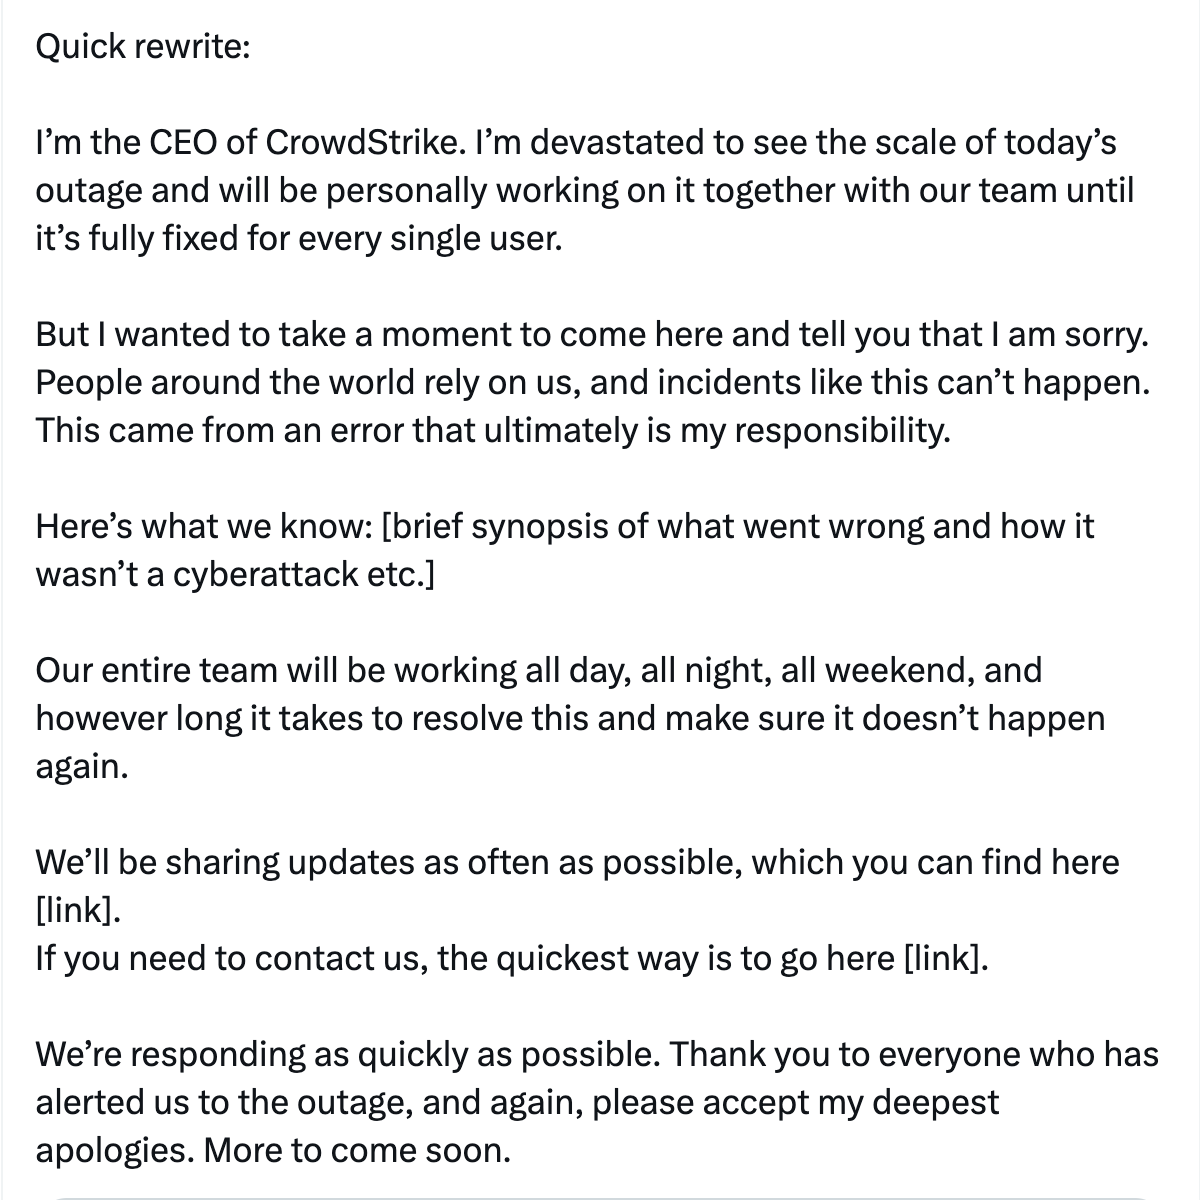 
  I’m the CEO of CrowdStrike. I’m devastated to see the scale of today’s outage and will be personally working on it together with our team until it’s fully fixed for every single user.

  But I wanted to take a moment to come here and tell you that I am sorry. People around the world rely on us, and incidents like this can’t happen. This came from an error that ultimately is my responsibility. 

  Here’s what we know: [brief synopsis of what went wrong and how it wasn’t a cyberattack etc.]

  Our entire team will be working all day, all night, all weekend, and however long it takes to resolve this and make sure it doesn’t happen again.

  We’ll be sharing updates as often as possible, which you can find here [link]. If you need to contact us, the quickest way is to go here [link].

  We’re responding as quickly as possible. Thank you to everyone who has alerted us to the outage, and again, please accept my deepest apologies. More to come soon.
